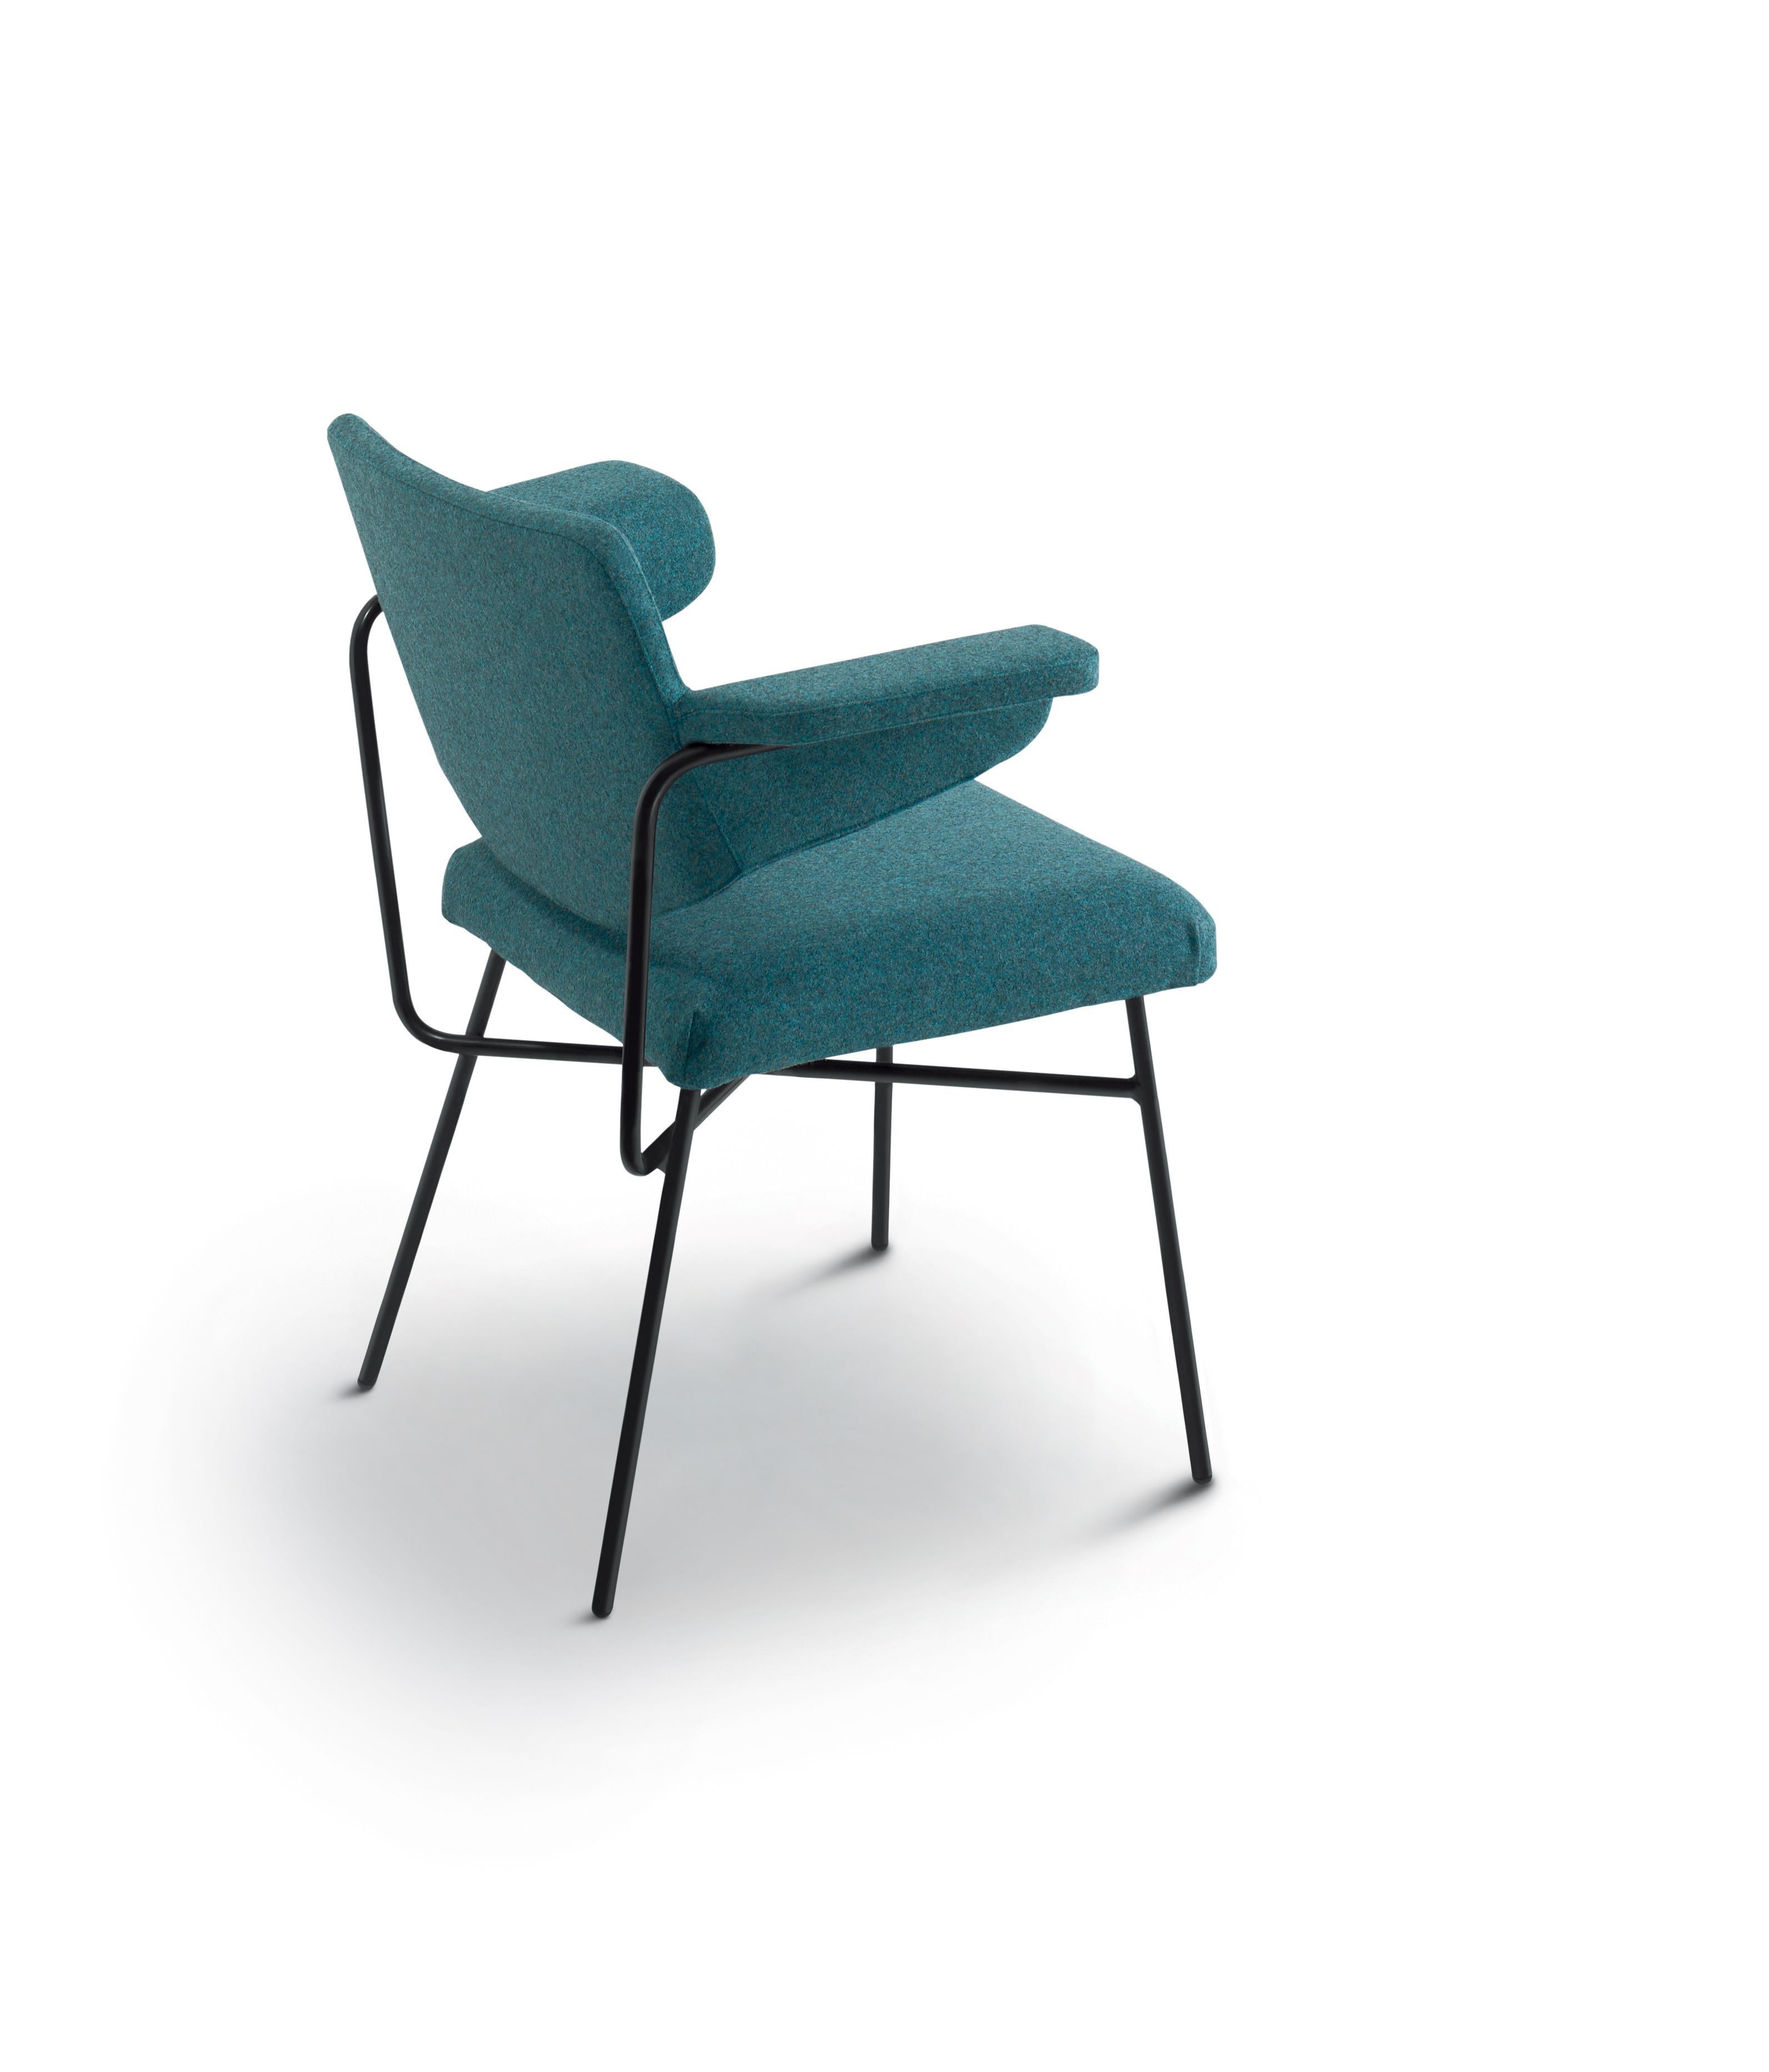 Neptunia collection, that includes armchair and chair, was designed in the ’50s, as a continuation of the Elettra collection, for giving choice to design offices and public spaces. Neptunia resumes the soft and welcome shape and the proportions of